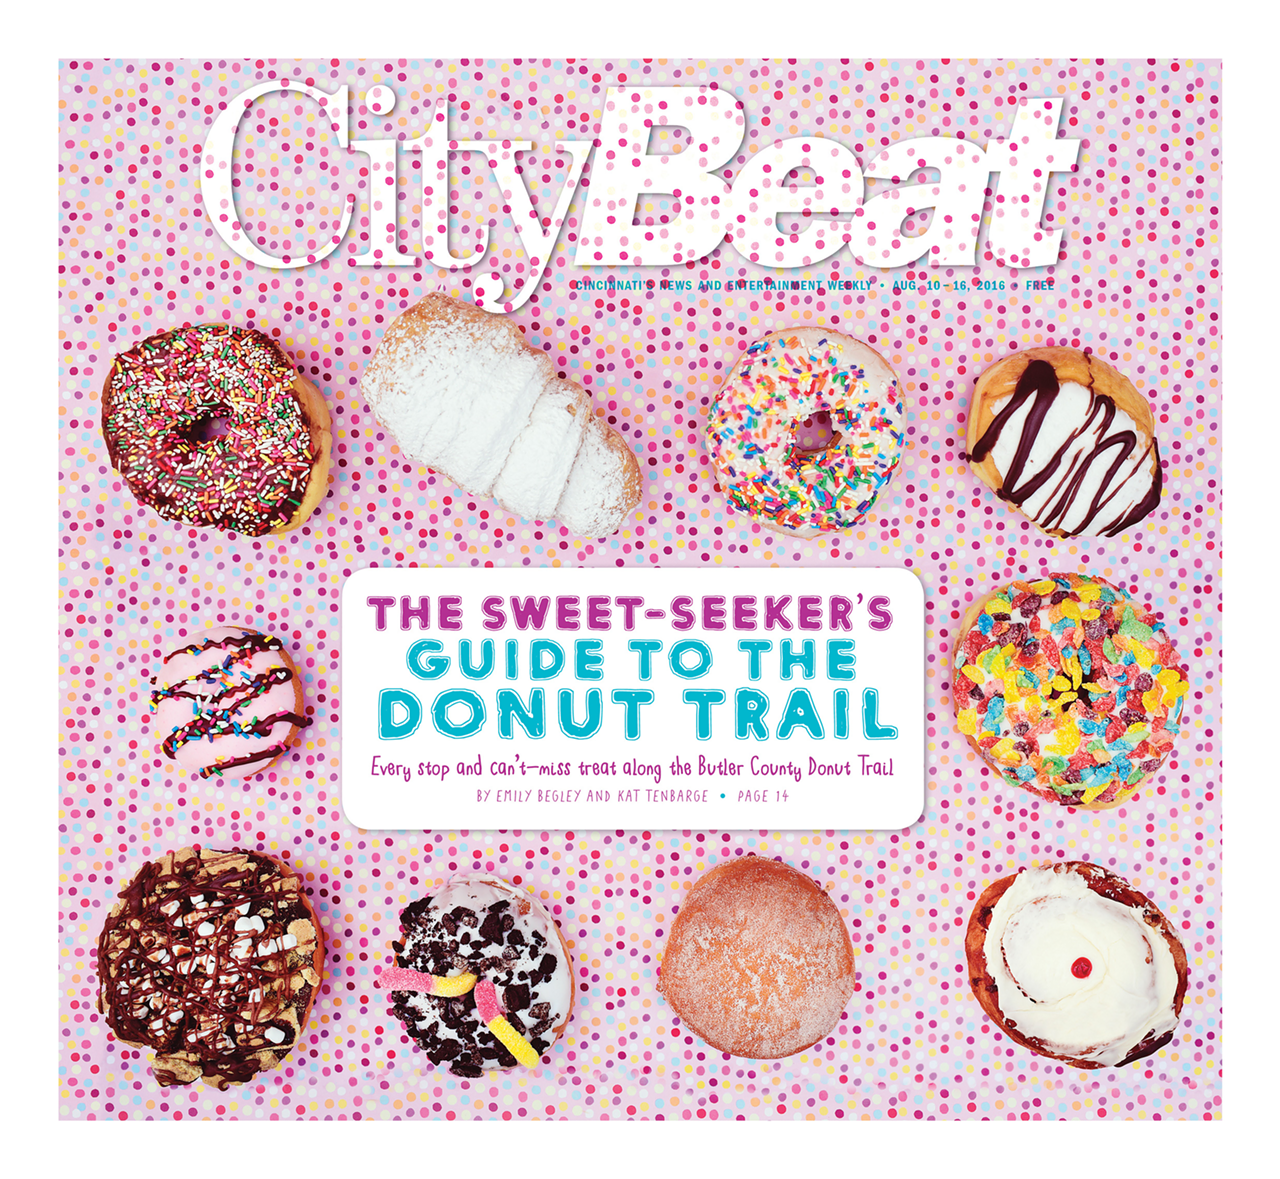 Butler County Donut Trail (issue of Aug. 10)